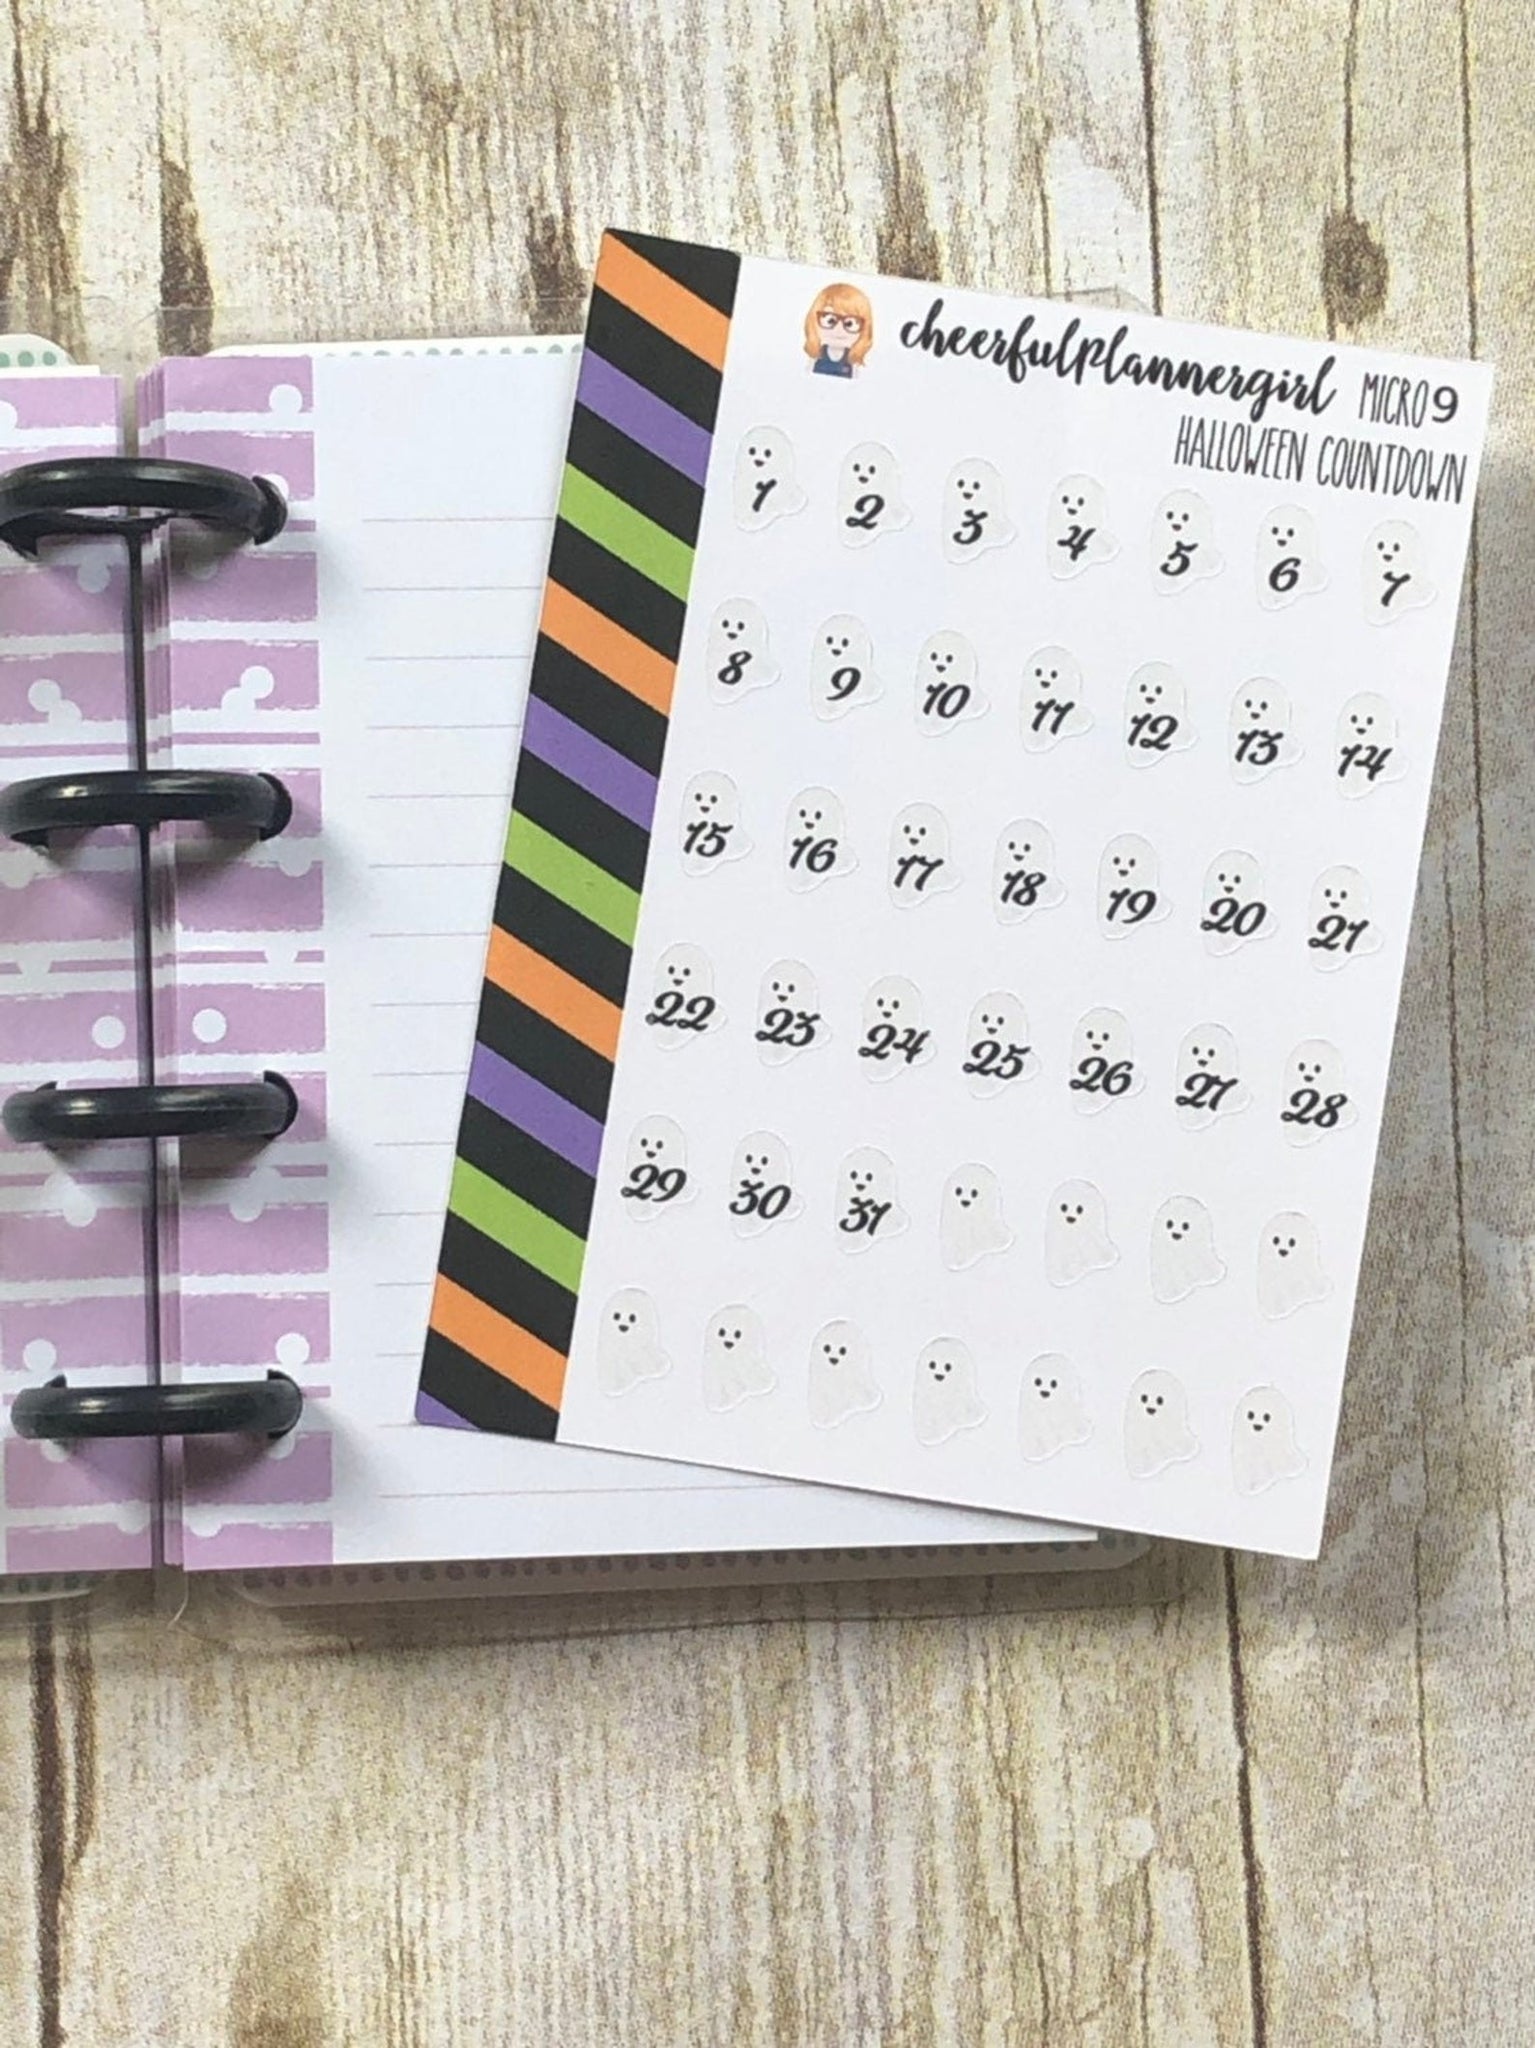 Halloween Ghost Countdown Micro Planner Stickers Numbered Fall Autumn Date